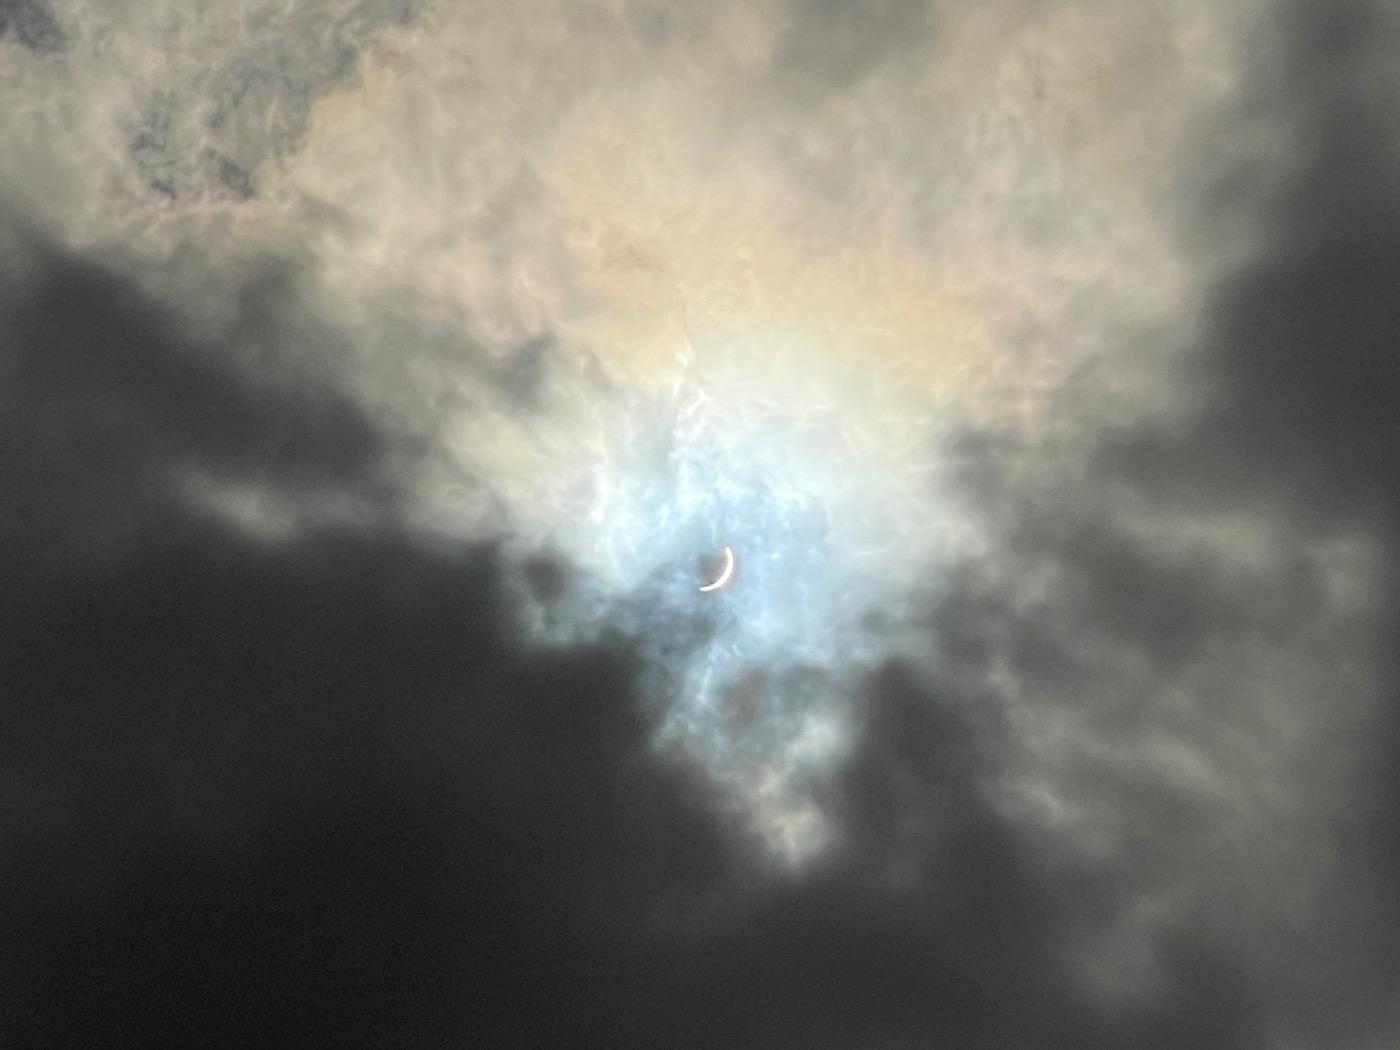 The sun just after totality, a tiny sliver visible through iridescent clouds.